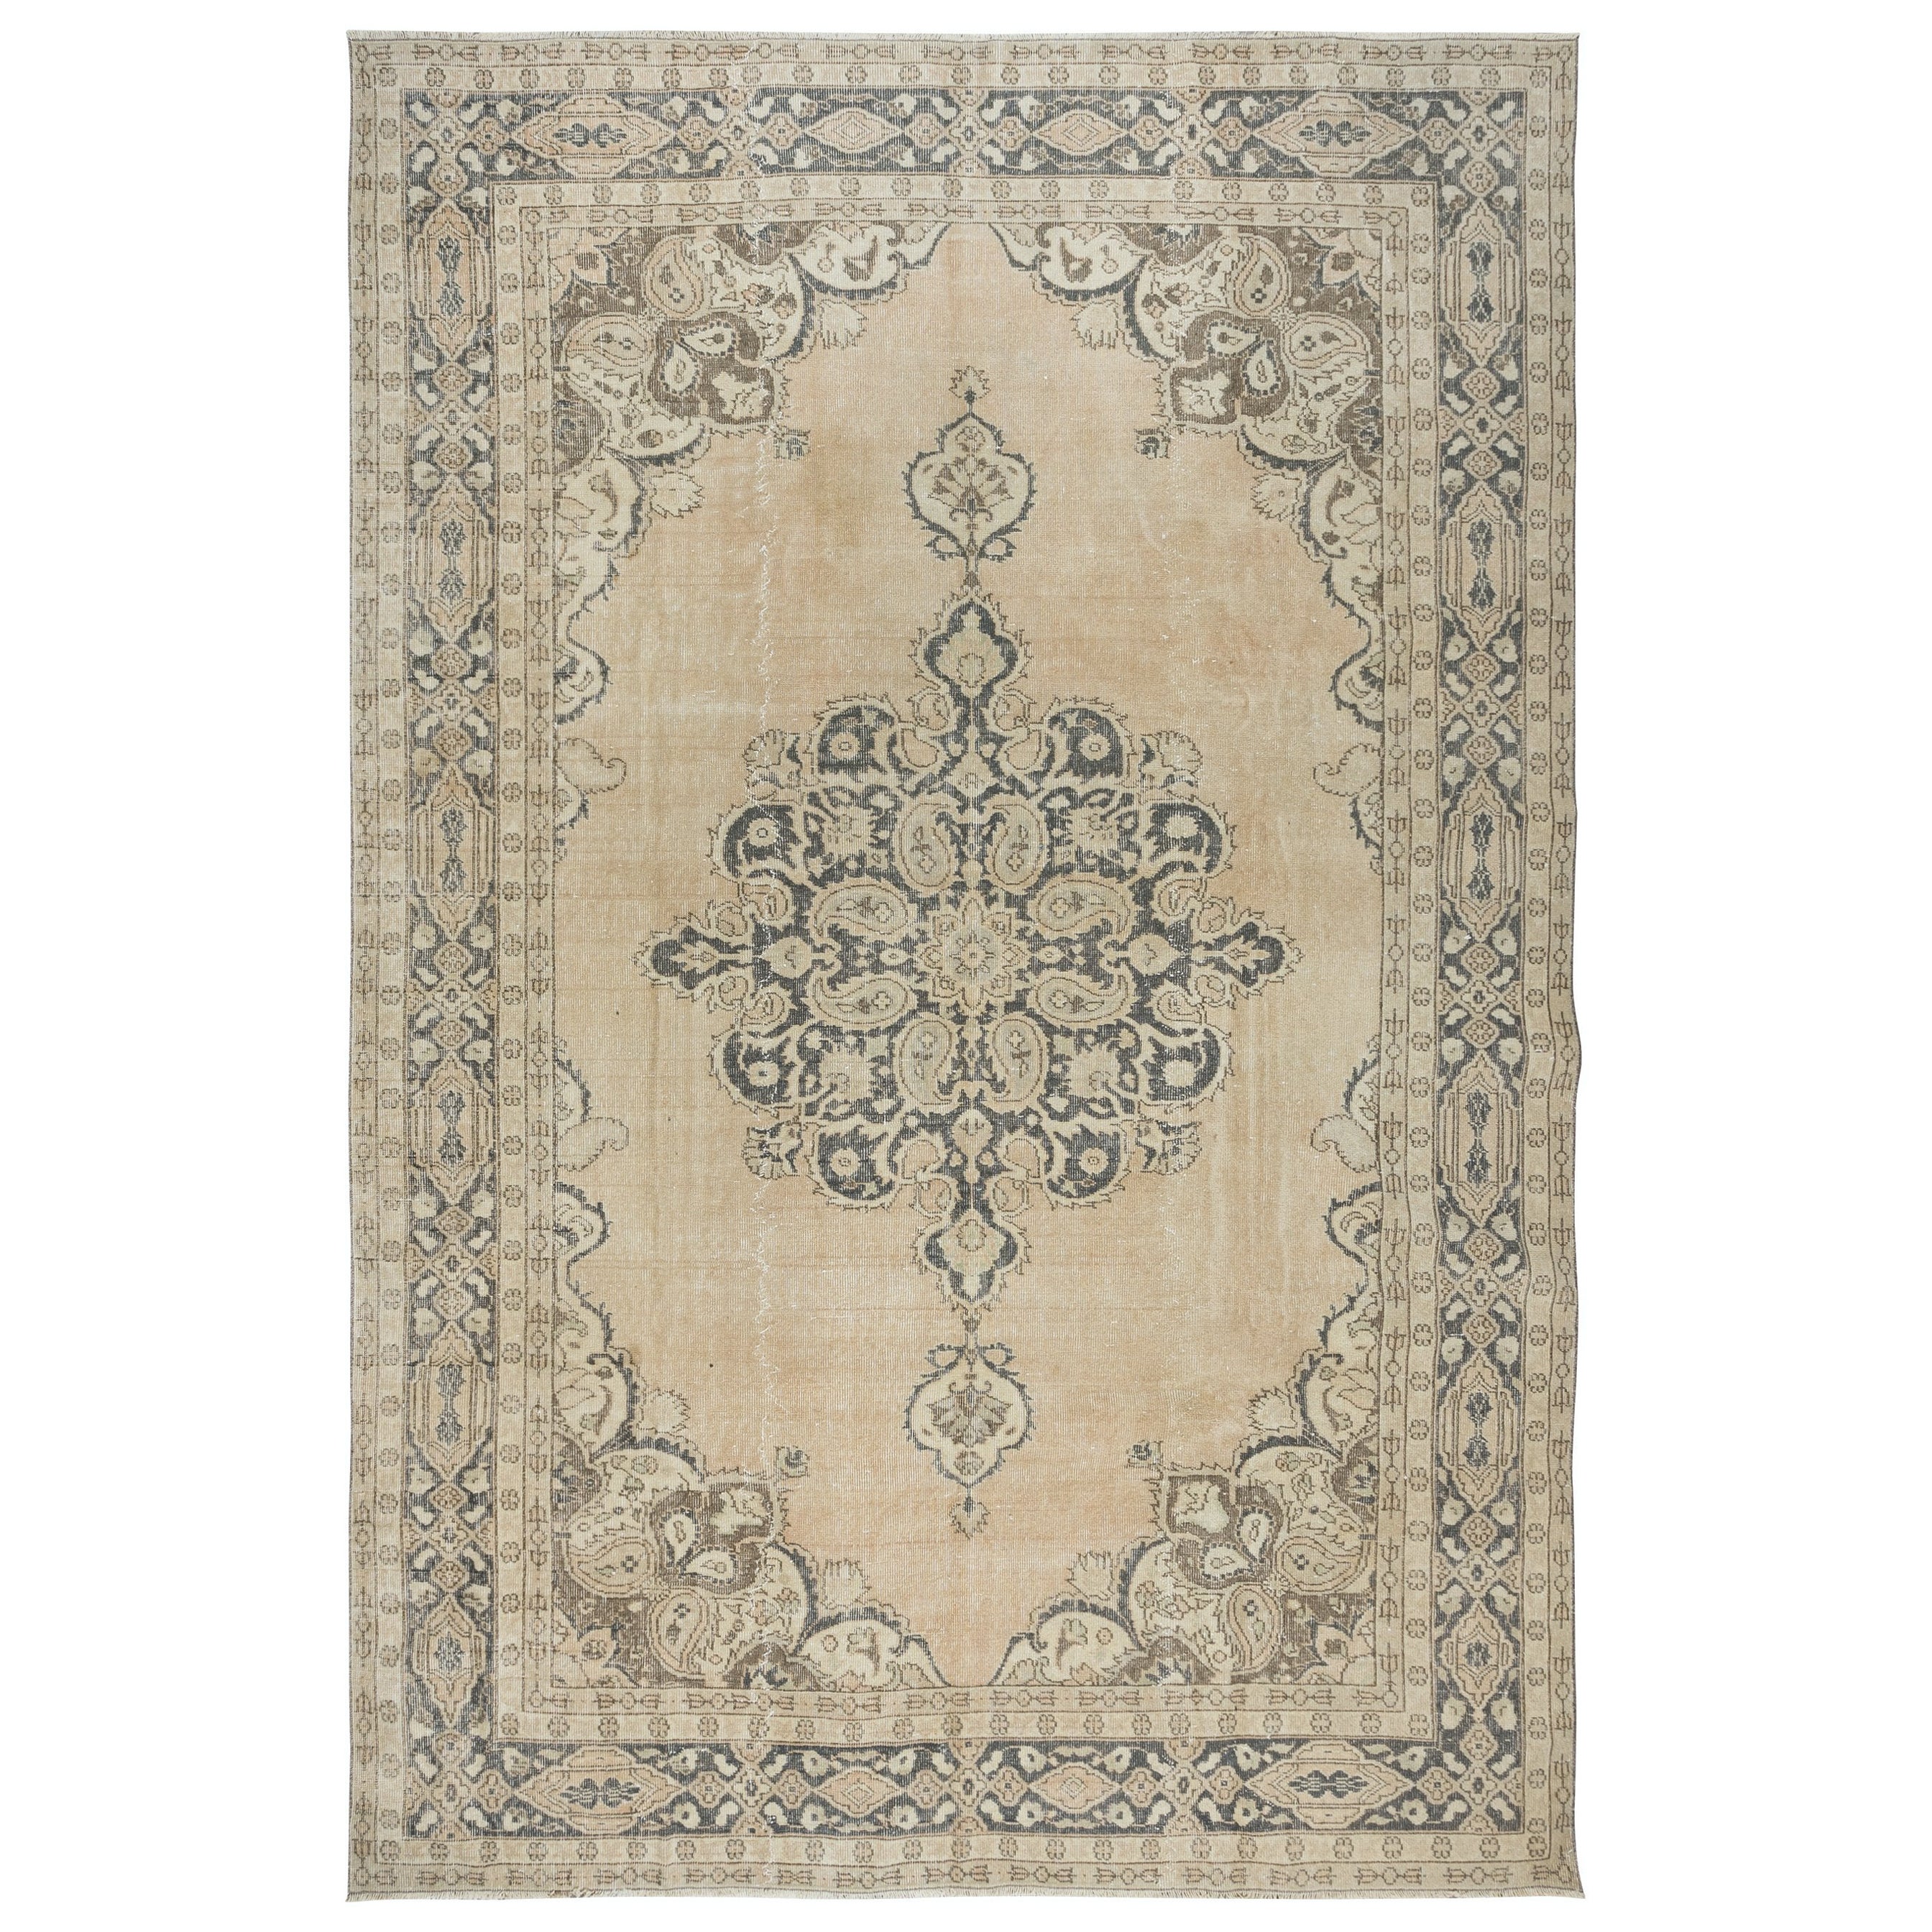 8.2x12 Ft Vintage Handmade Turkish Oushak Rug, Rustic Country House Style For Sale